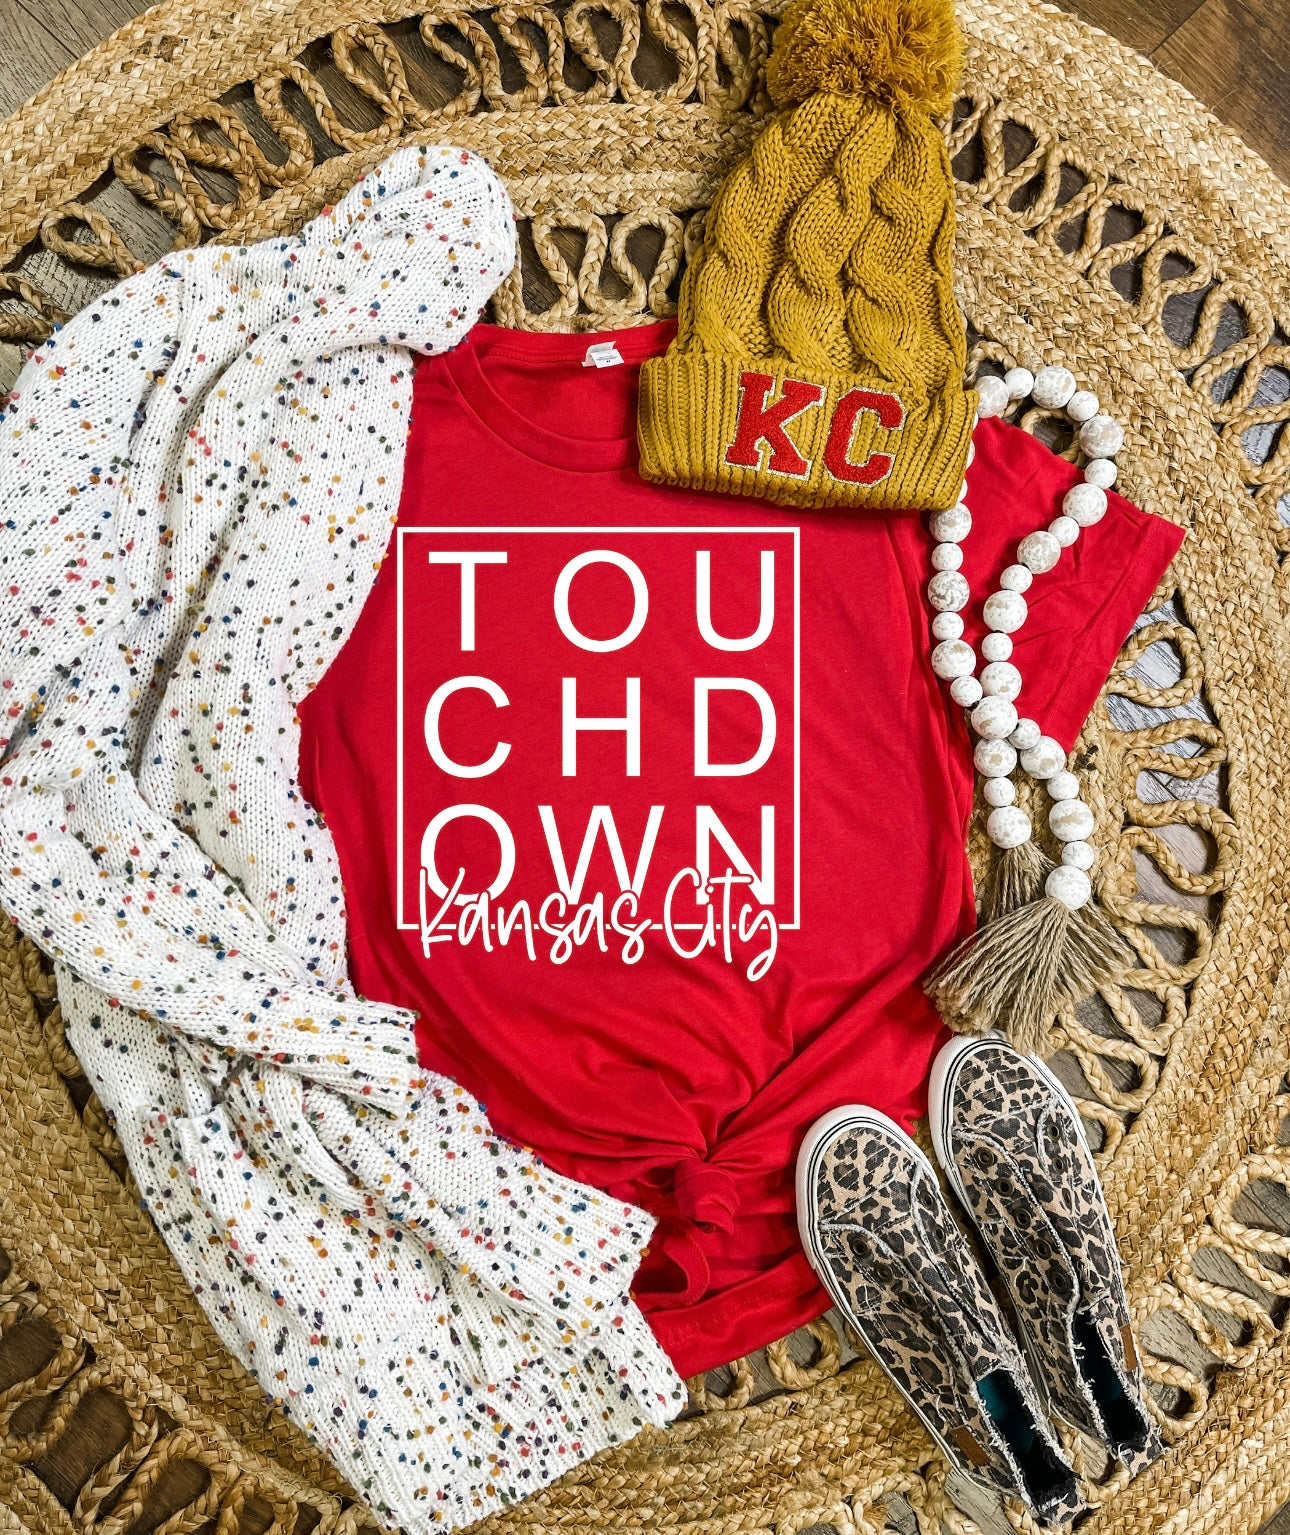 **HALFTIME DEAL** White Square Kansas City Touchdown Red Tee